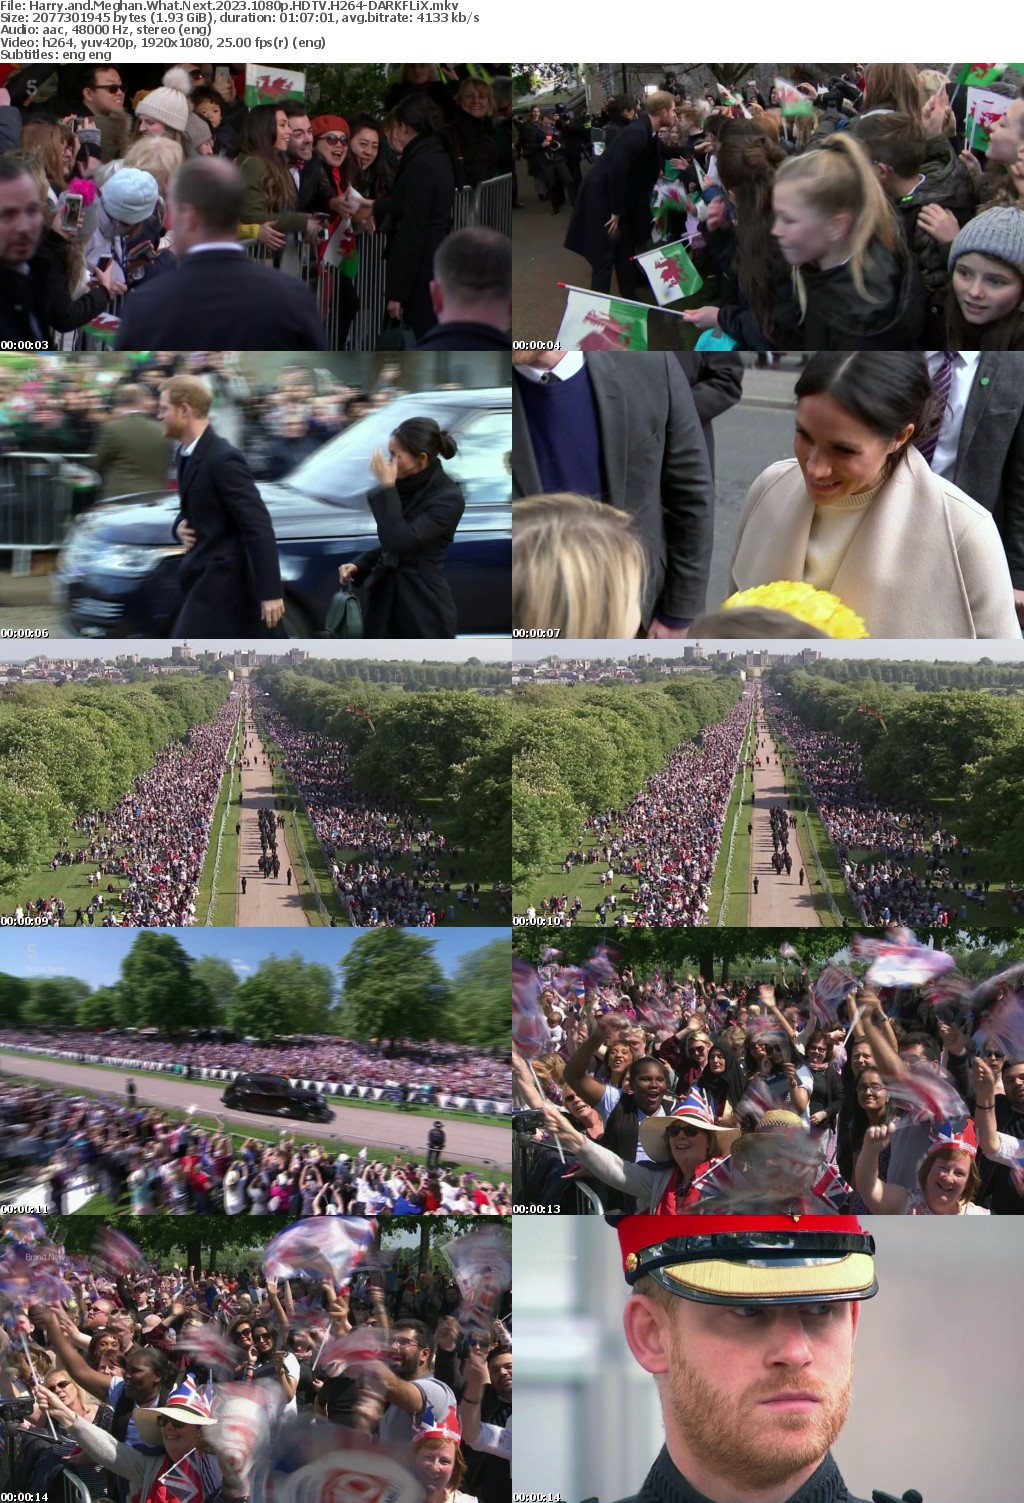 Harry and Meghan What Next 2023 1080p HDTV H264-DARKFLiX